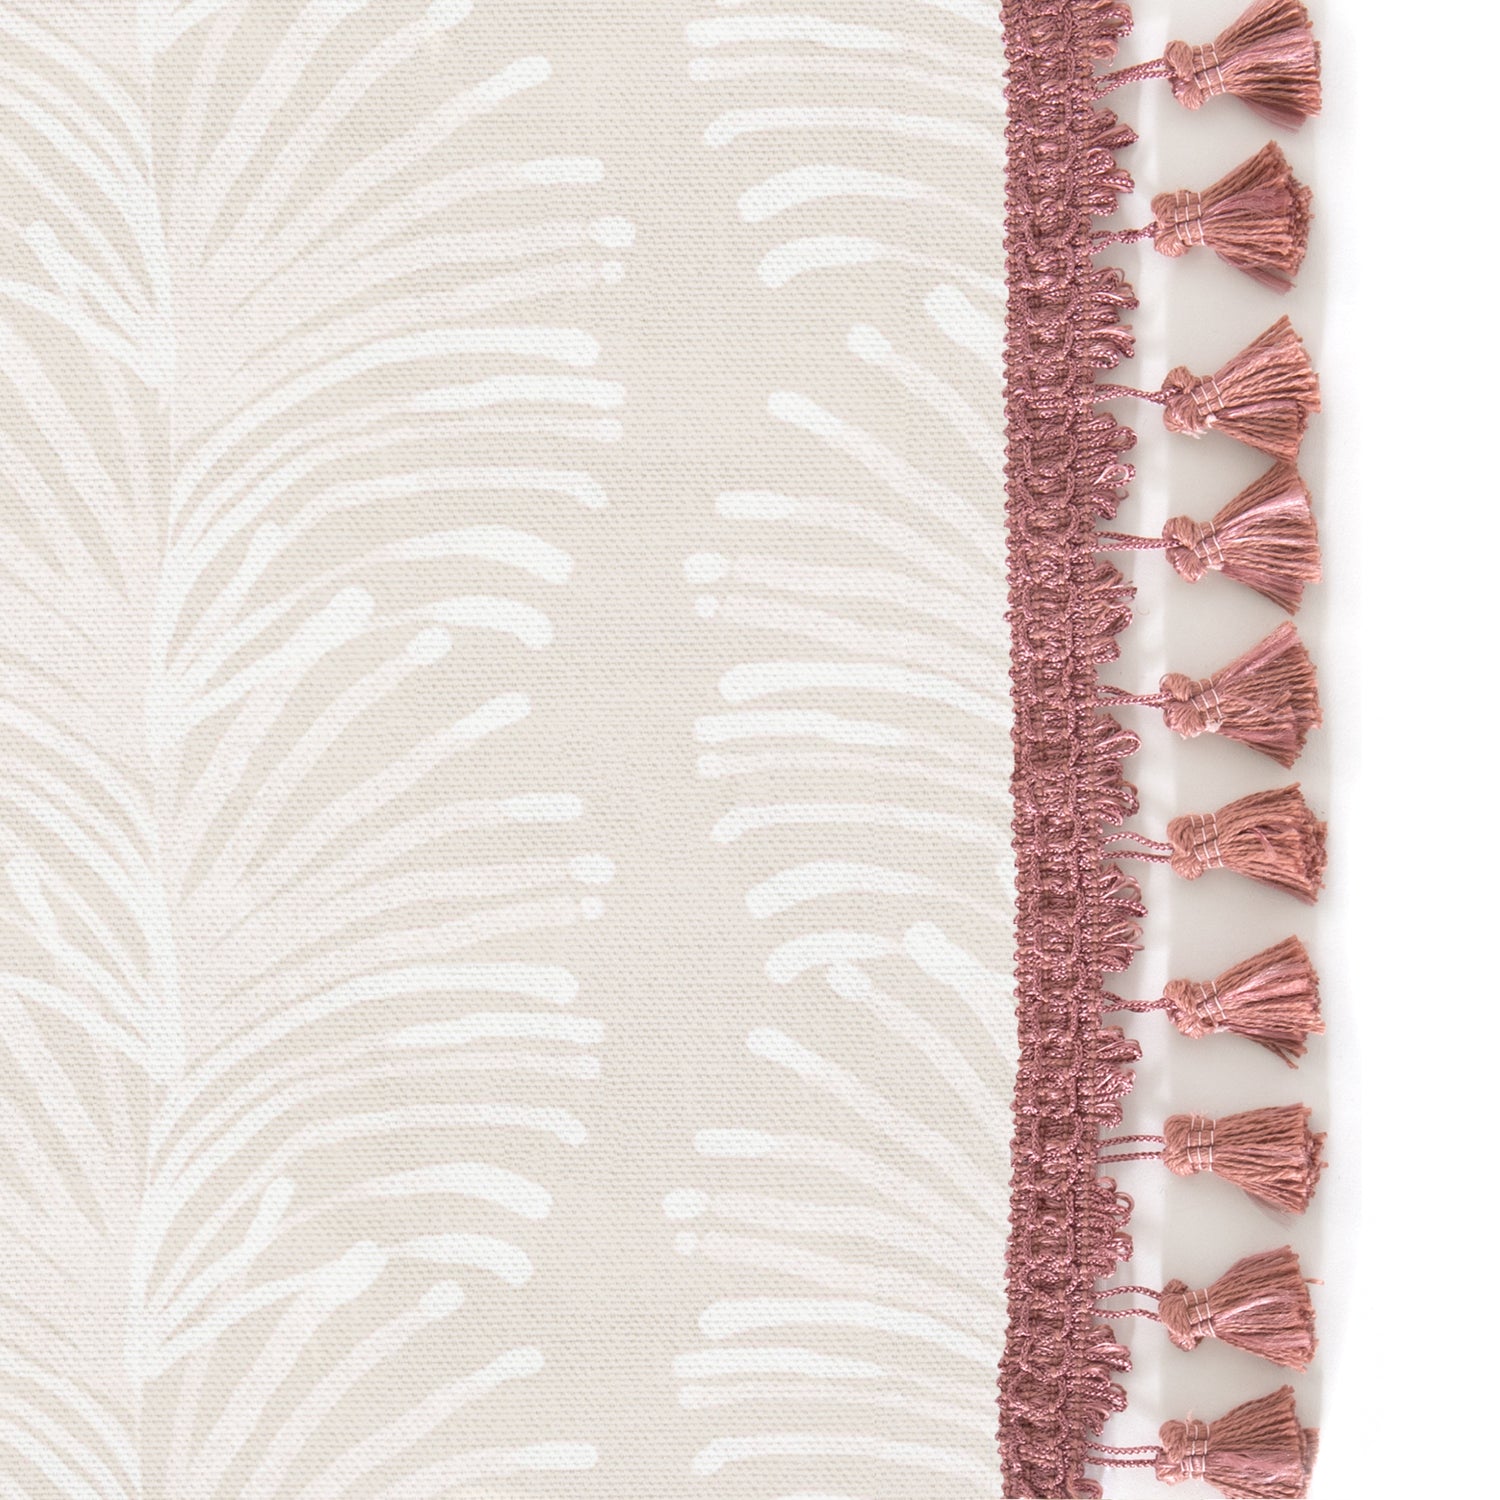 Upclose picture of Emma Sand custom shower curtain with dusty rose tassel trim